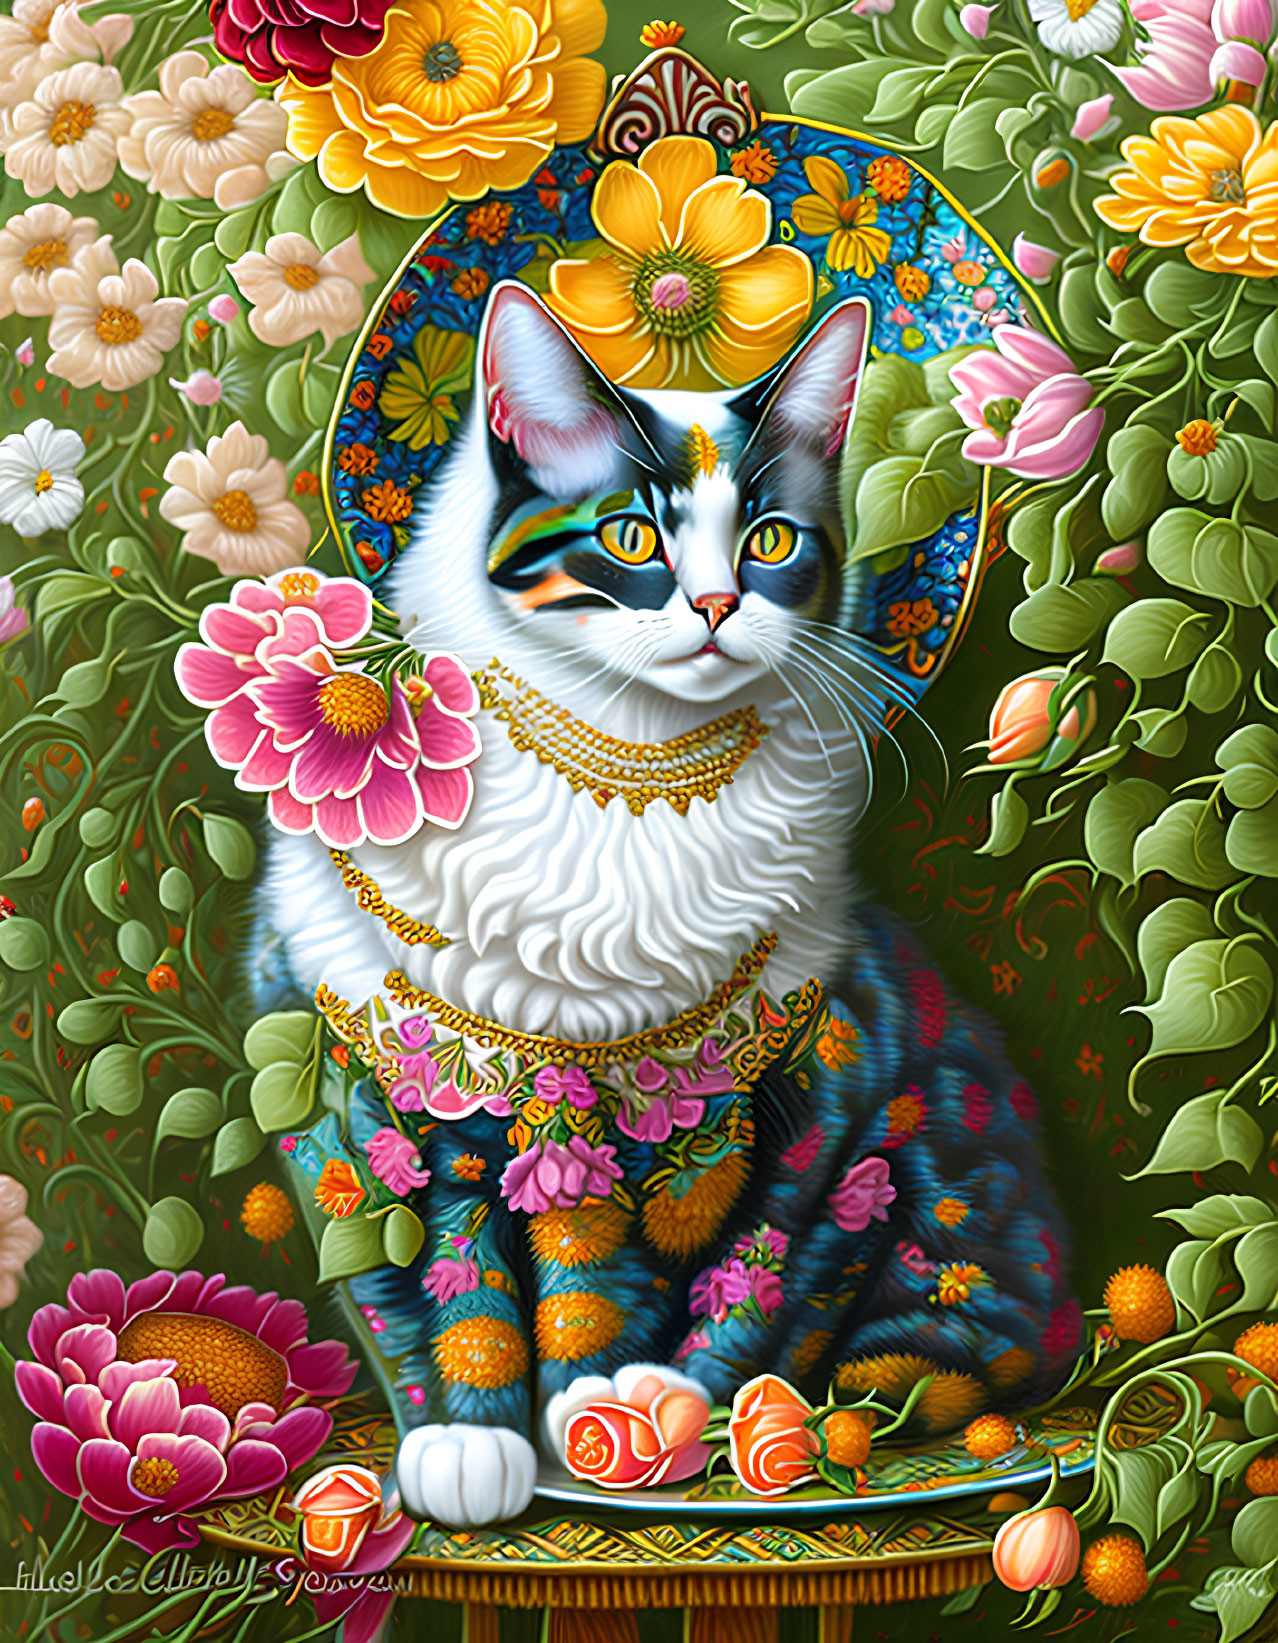 Colorful Cat Illustration with Floral Patterns and Jewelry on Floral Backdrop